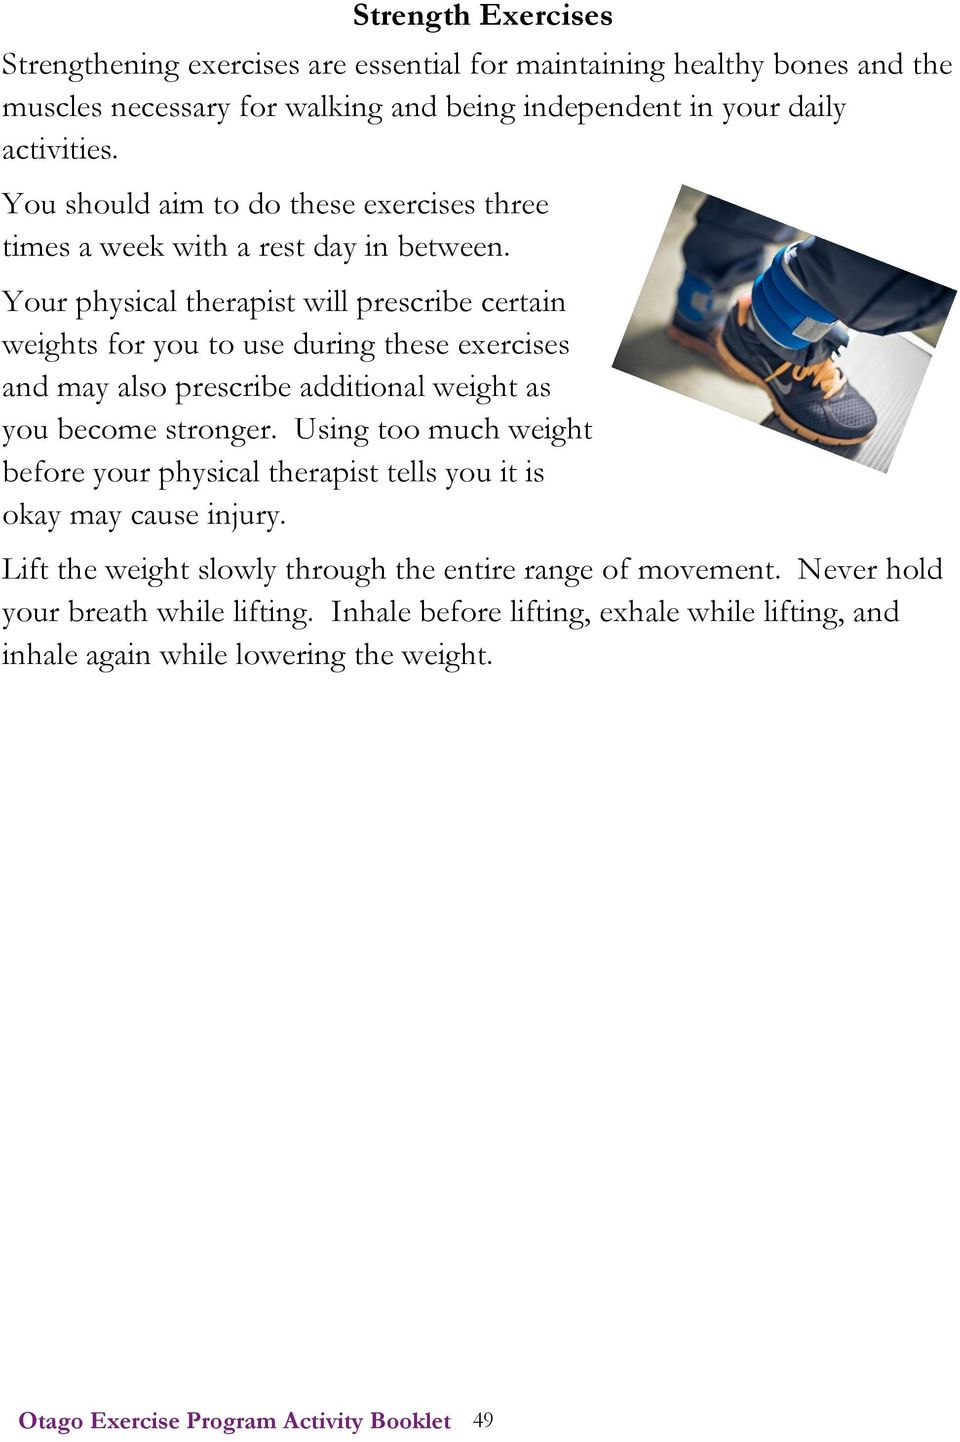 Your physical therapist will prescribe certain weights for you to use during these exercises and may also prescribe additional weight as you become stronger.